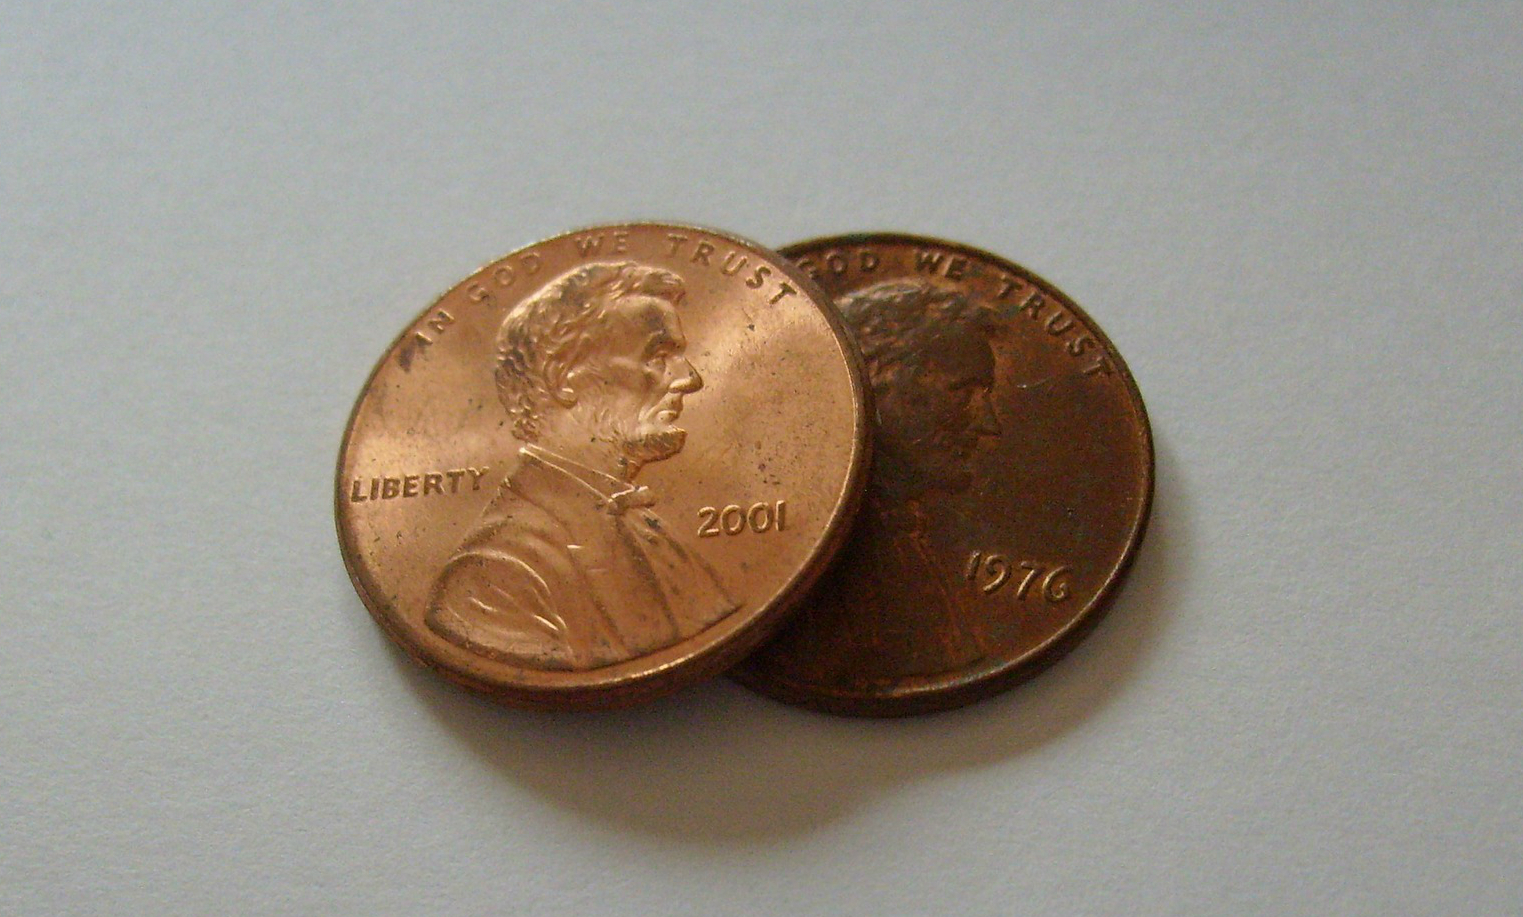 Abraham Lincoln on US one-cent